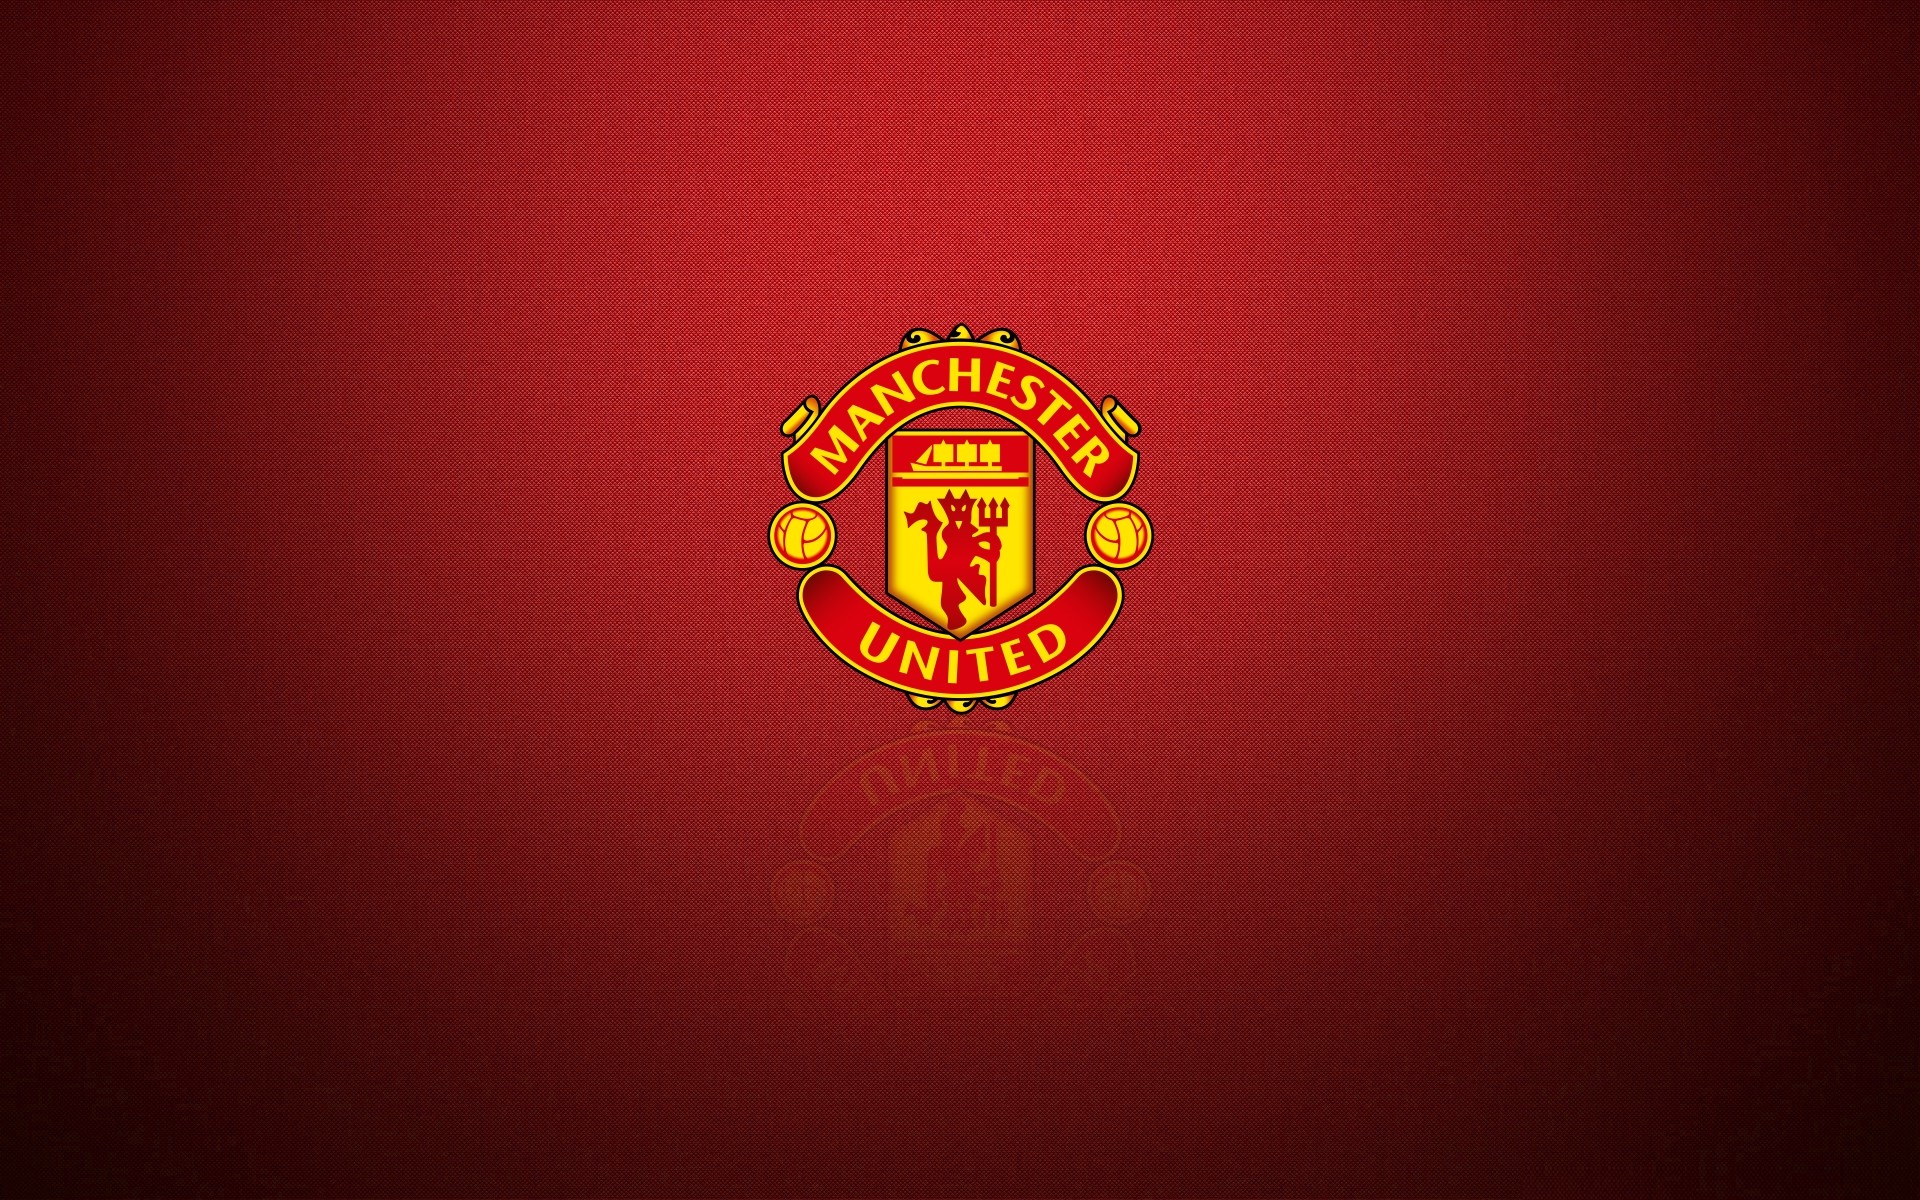 1920x1200 Manchester United widescreen desktop background with logo - 